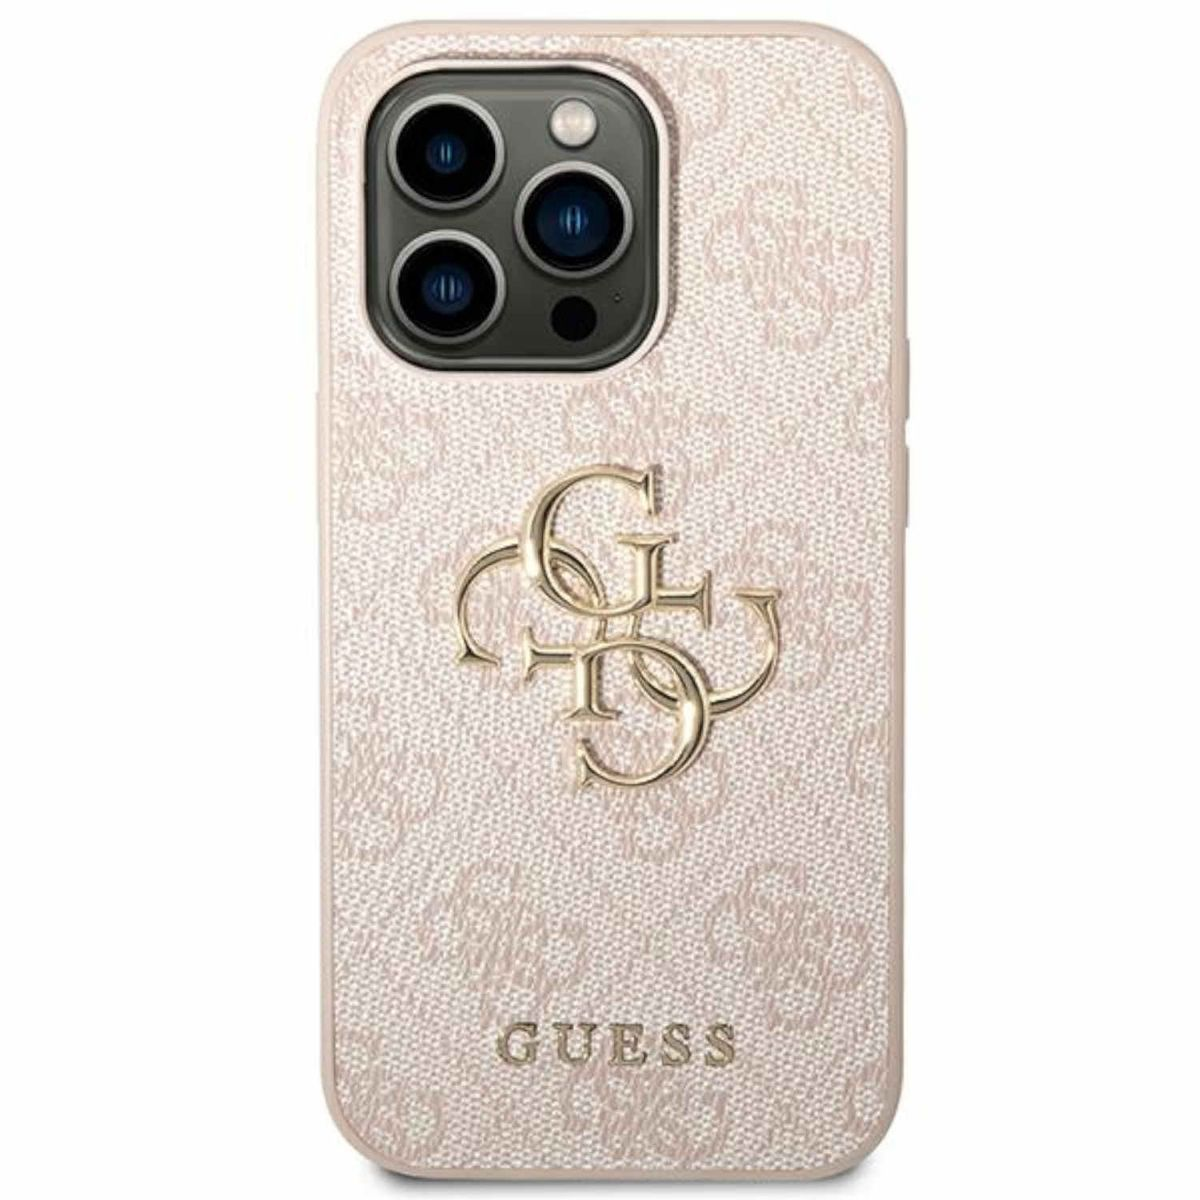 Pro, Pro Backcover, Logo Metal Case 4G 14 Keine iPhone iPhone Apple, Angabe GUESS (Pink), 14 Big